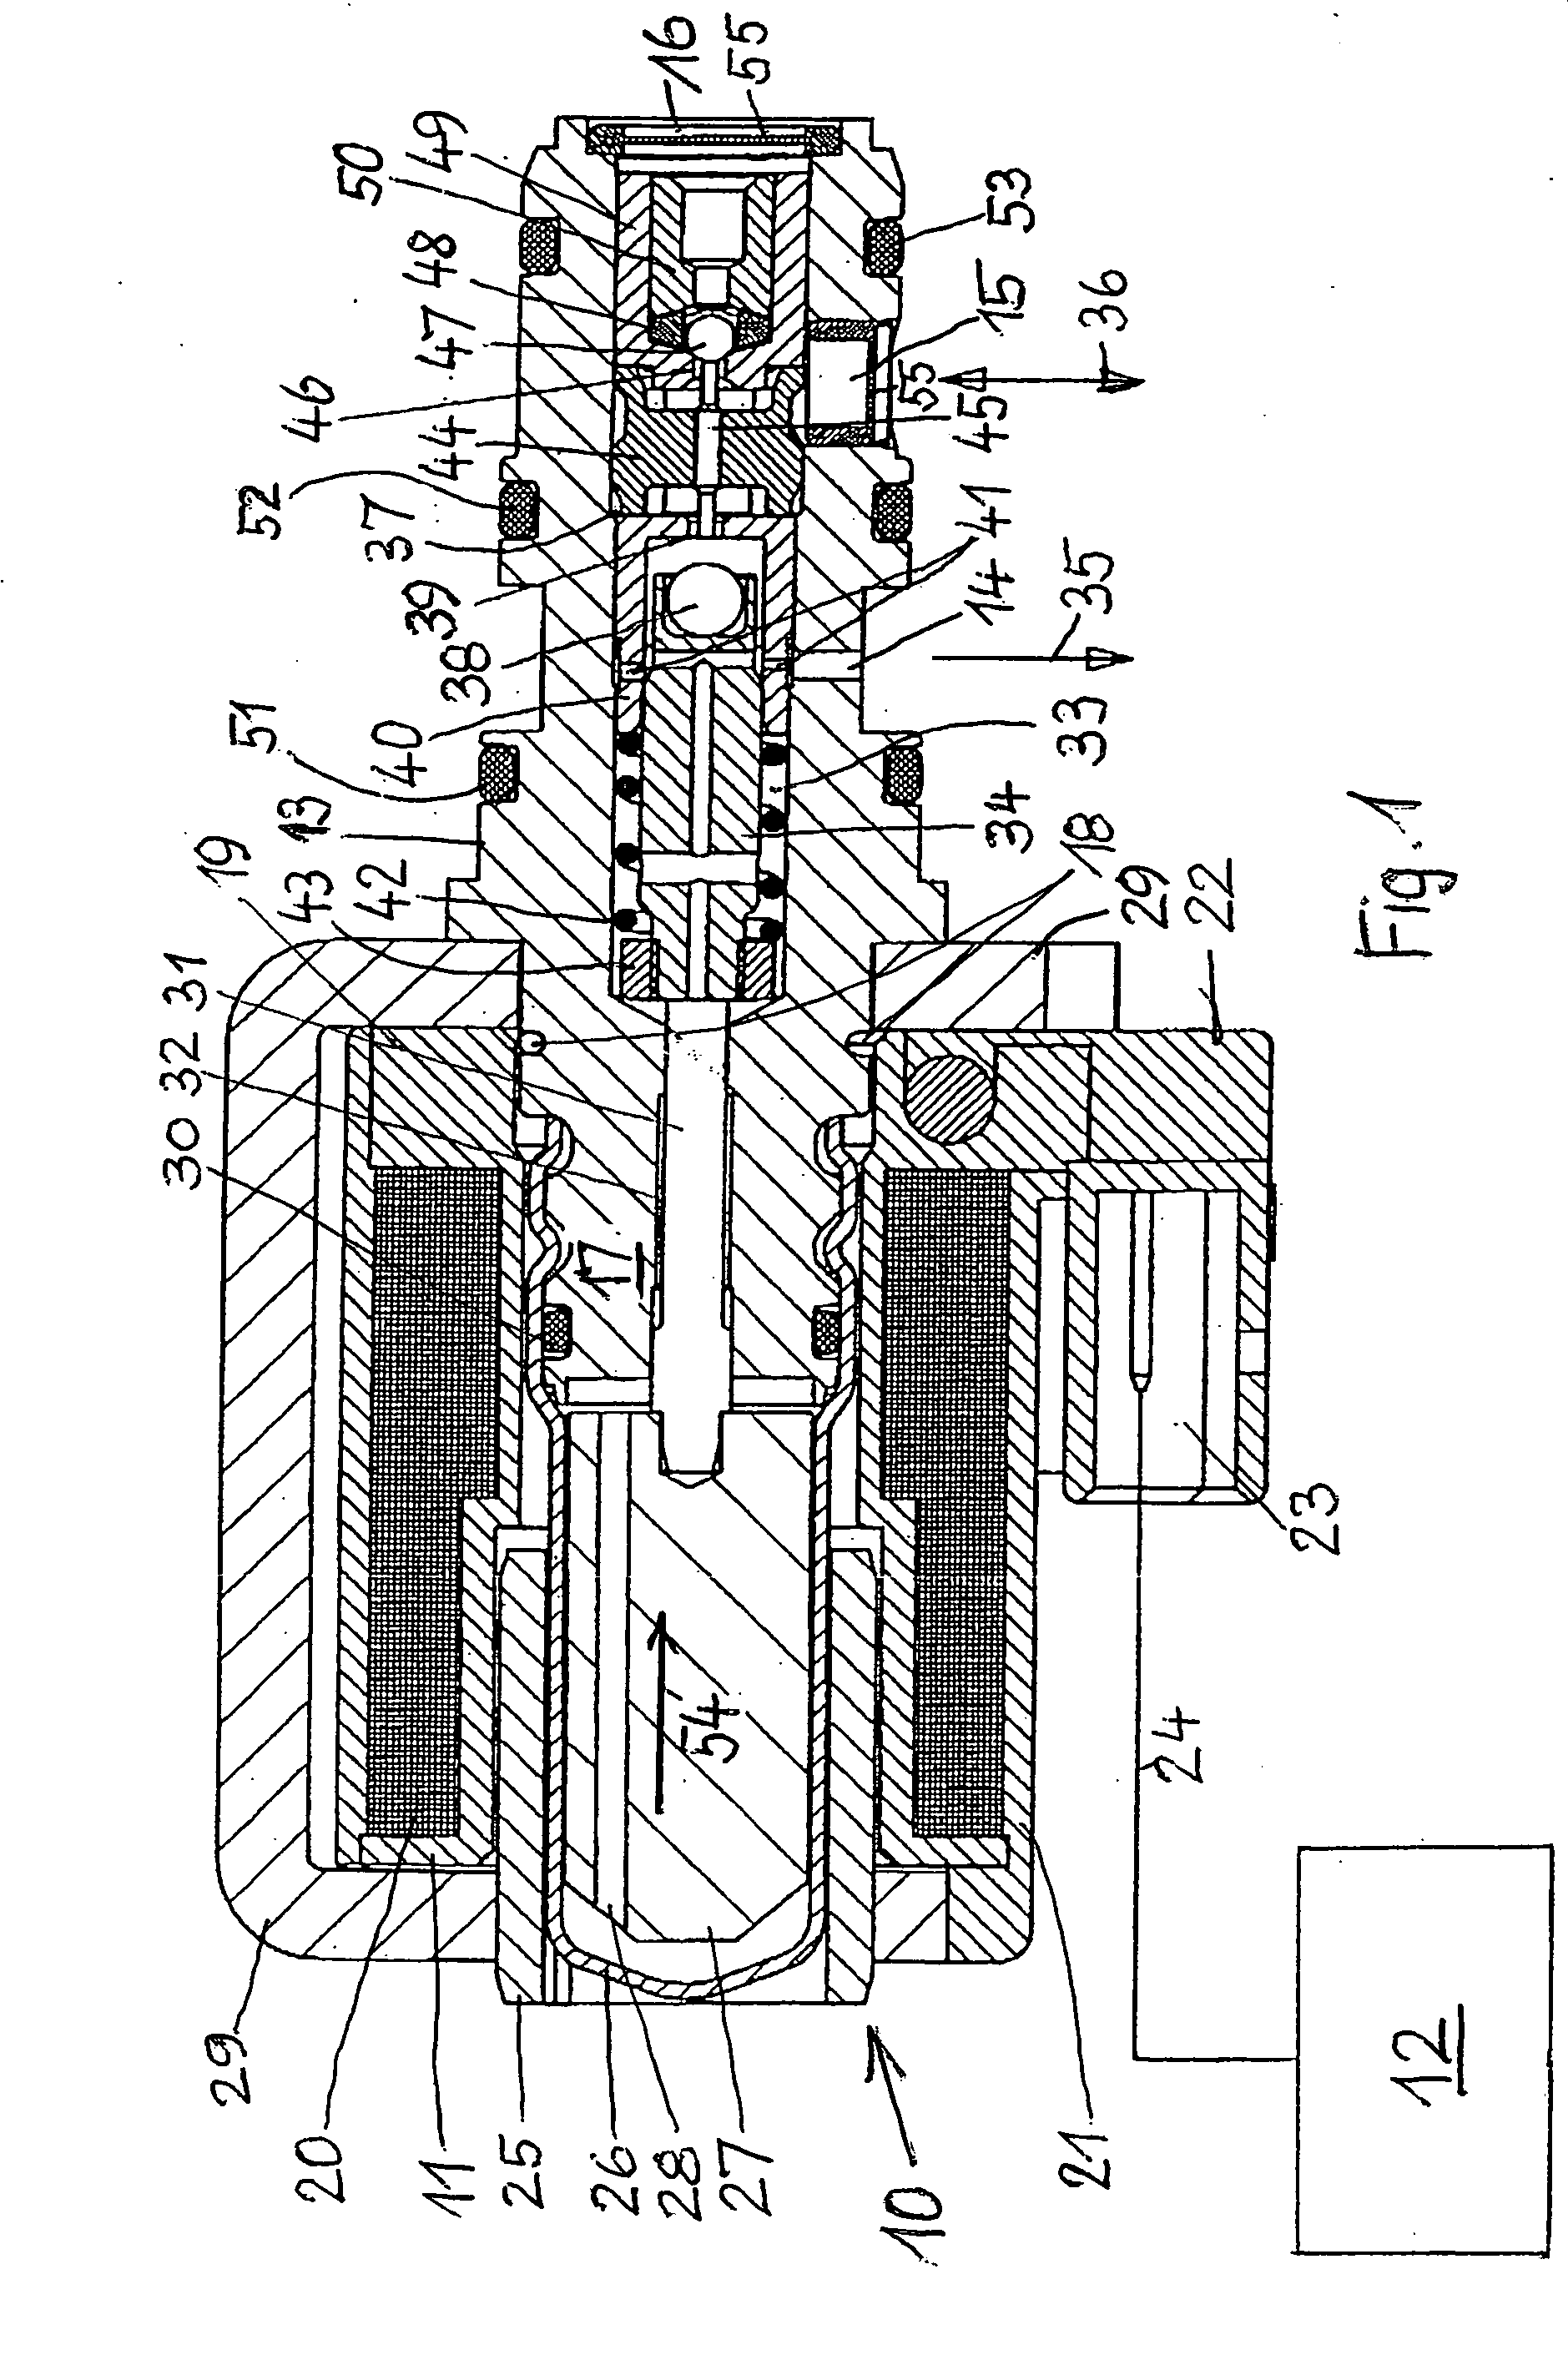 Controllable solenoid valve